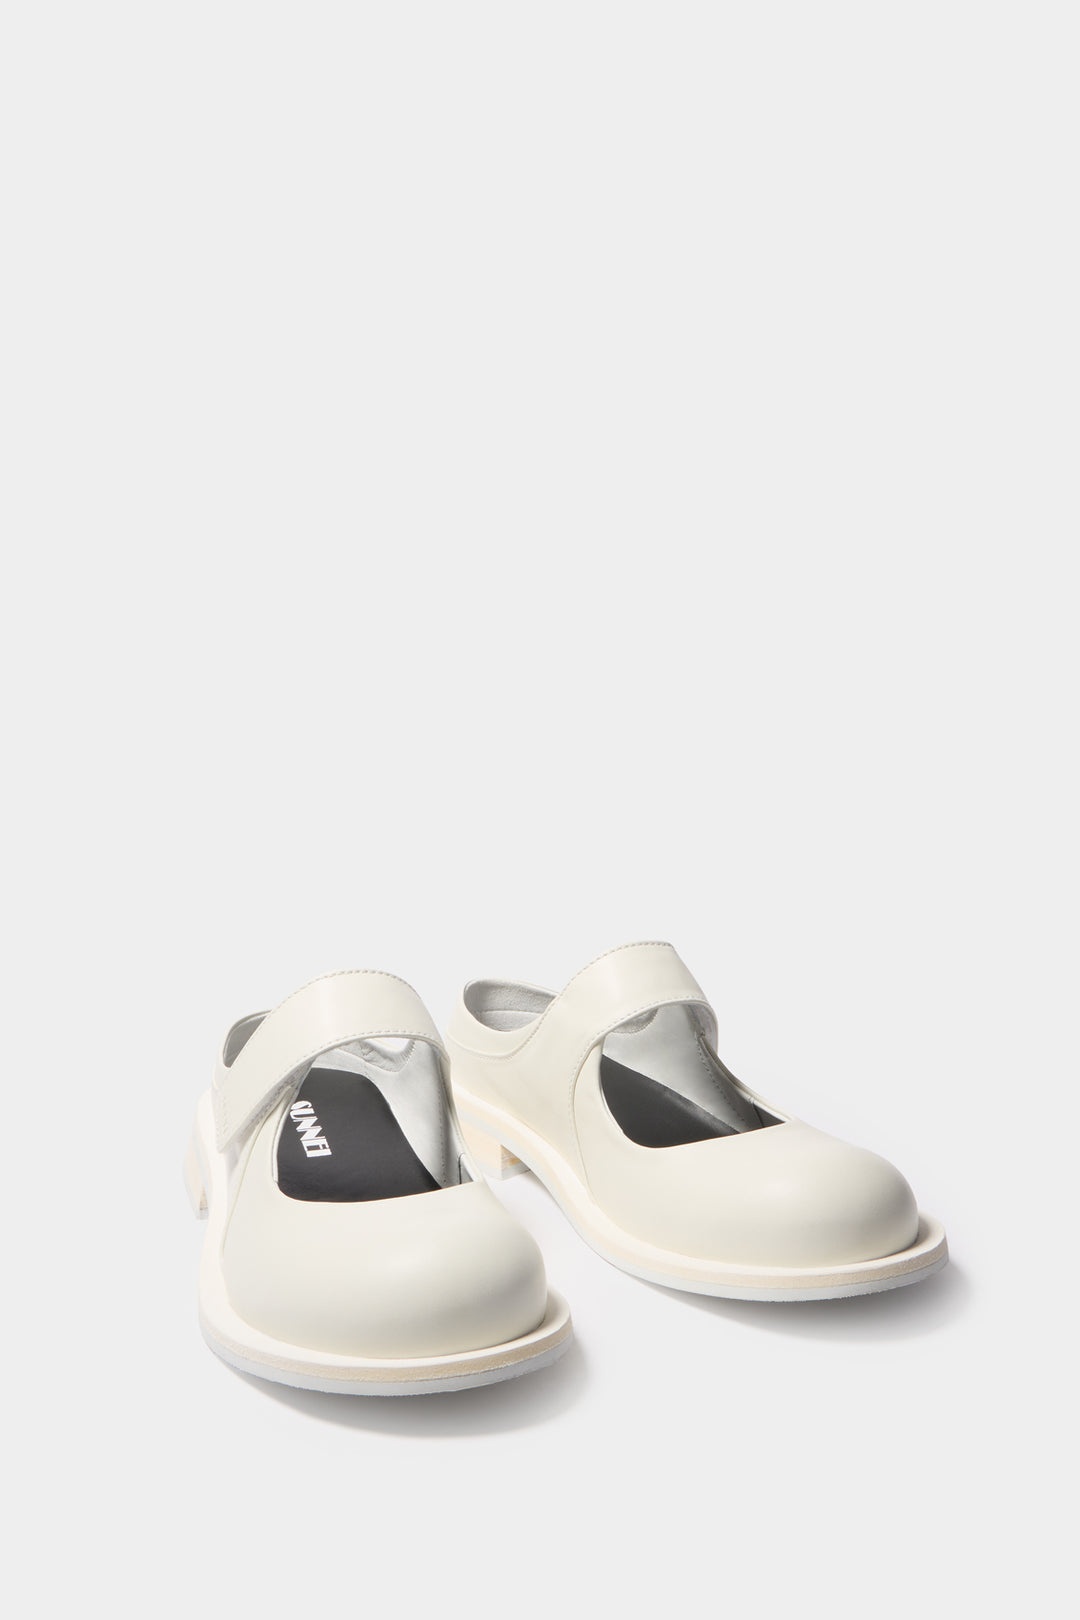 FORM MARG SABOT SHOES / off white - 2